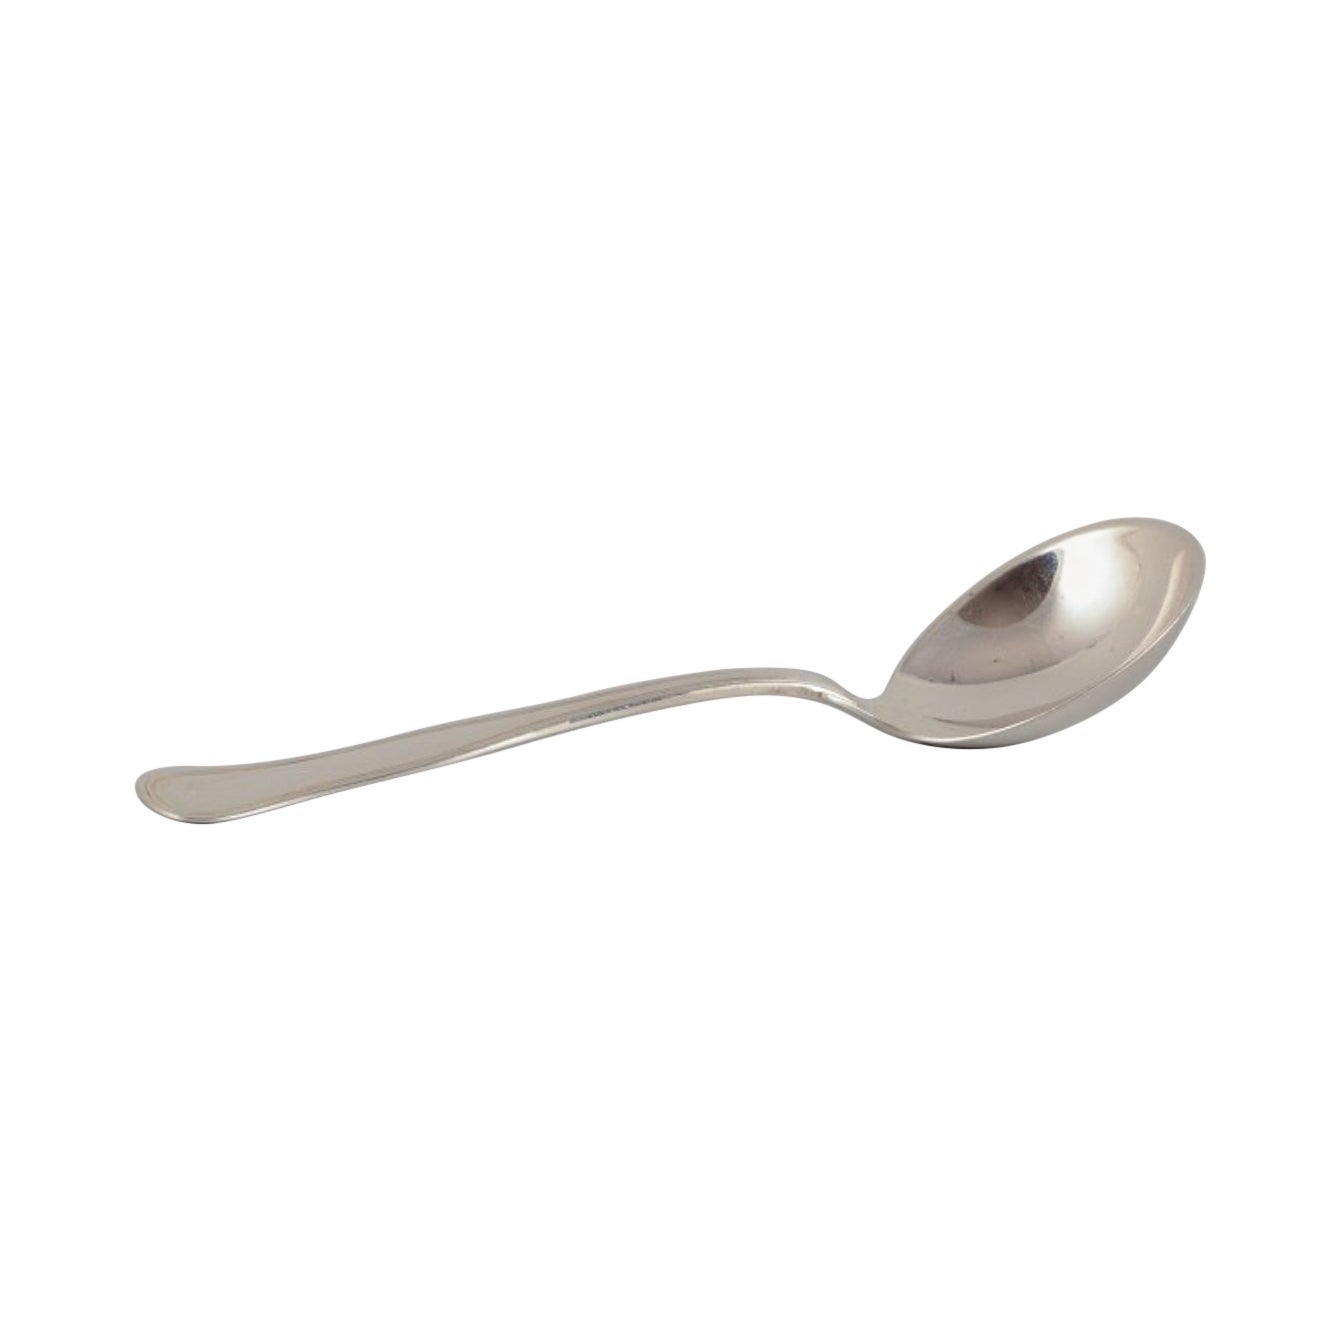 Cohr, Danish silversmith. "Old Danish" serving spoon in 830 silver. For Sale